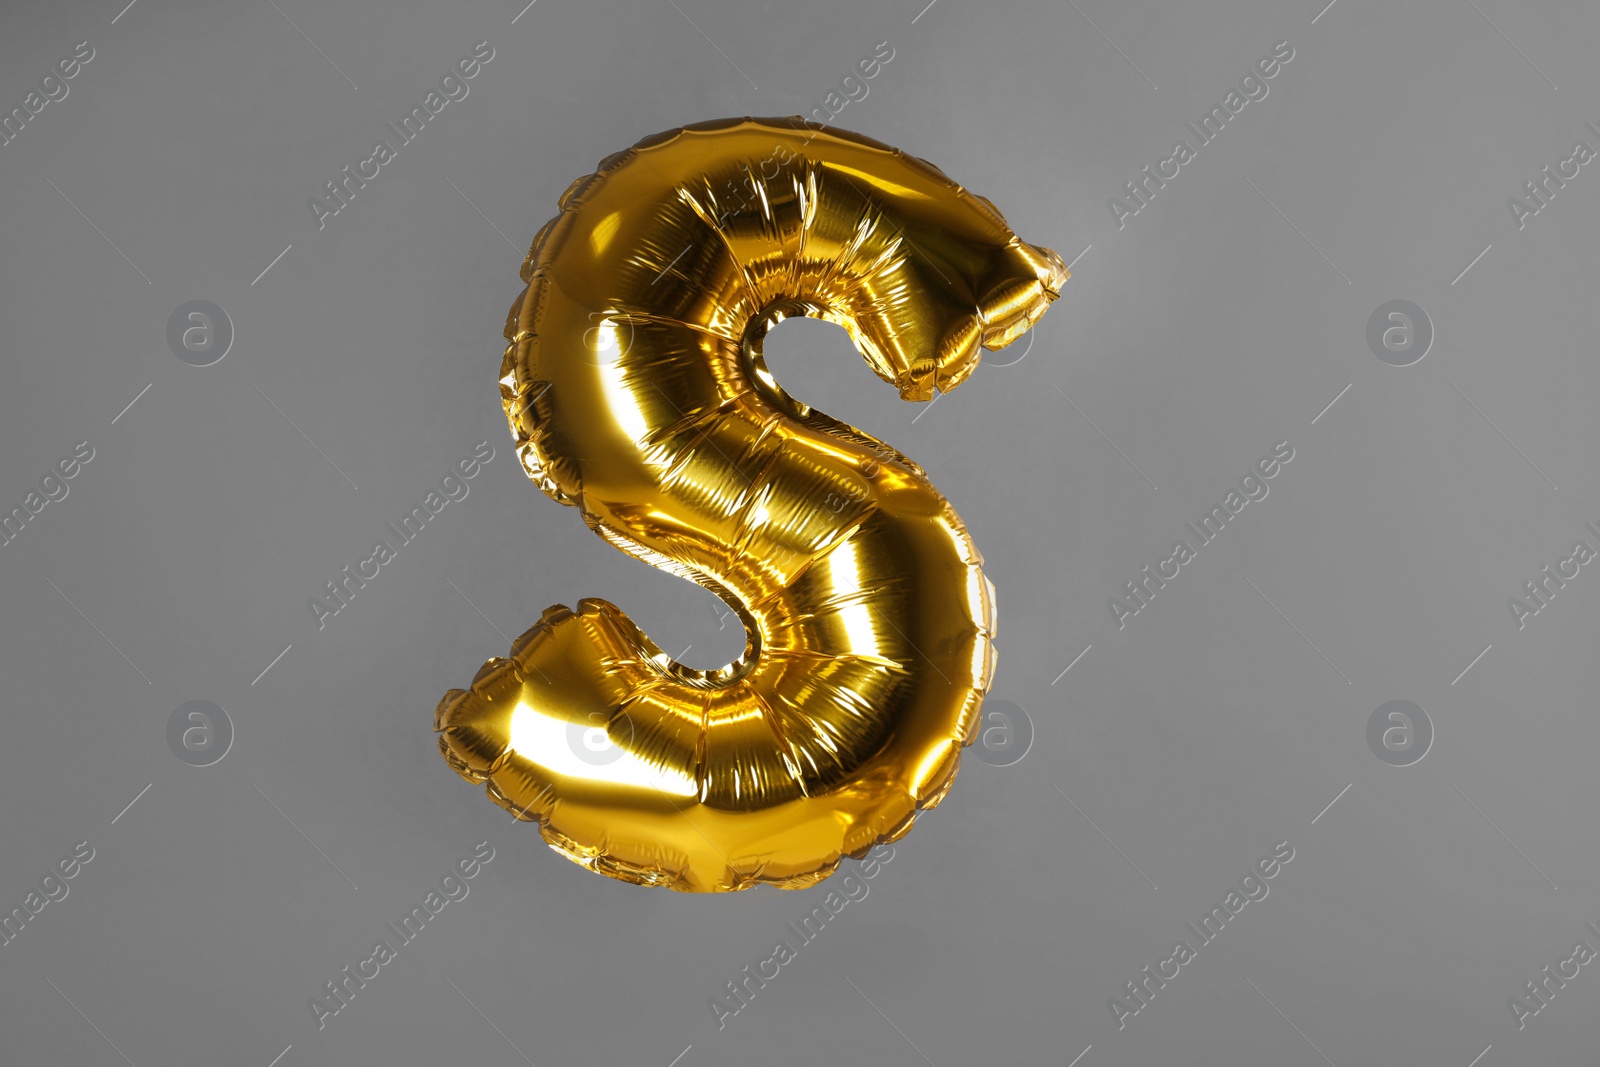 Photo of Golden letter S balloon on grey background